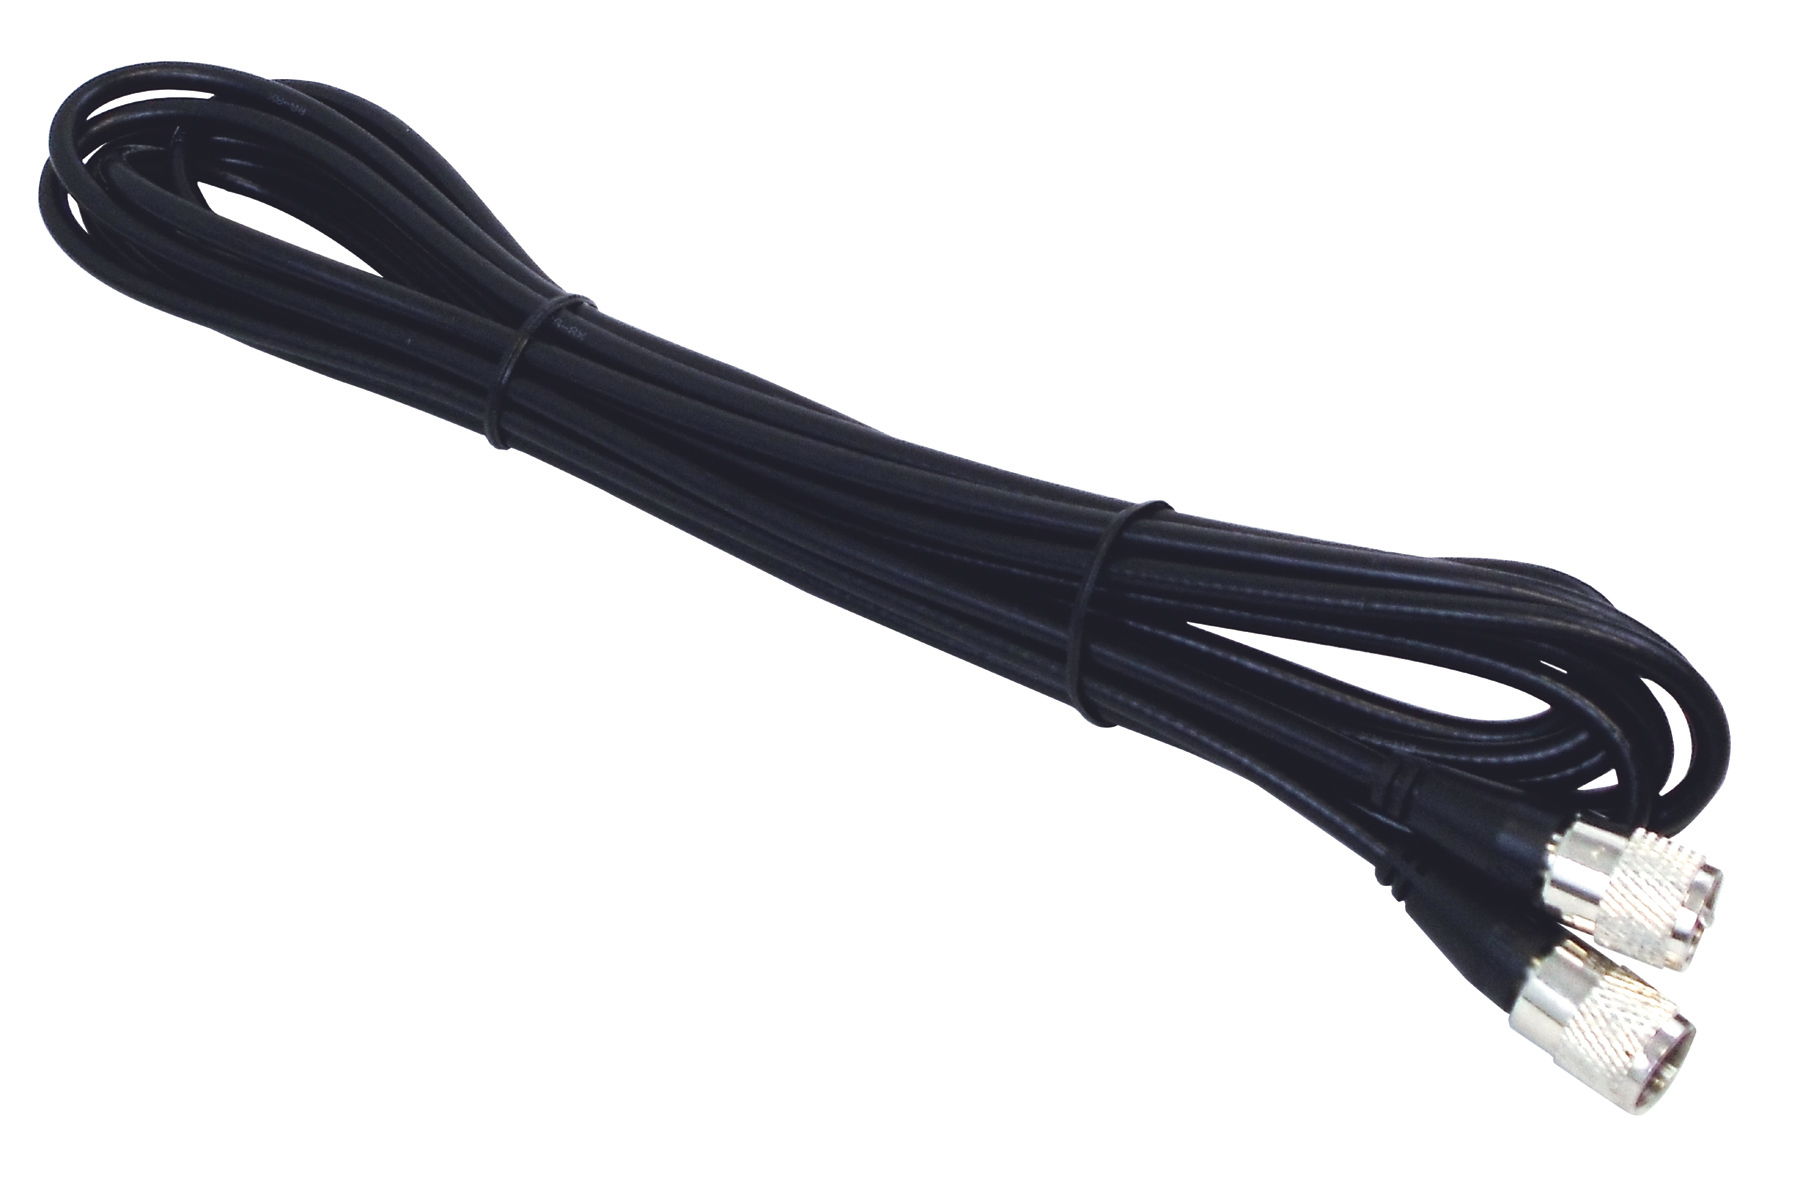 Kalibur 20.0 Foot Black Rg8X Coax Cable Assembly With Molded Pl259 Connectors On Each End